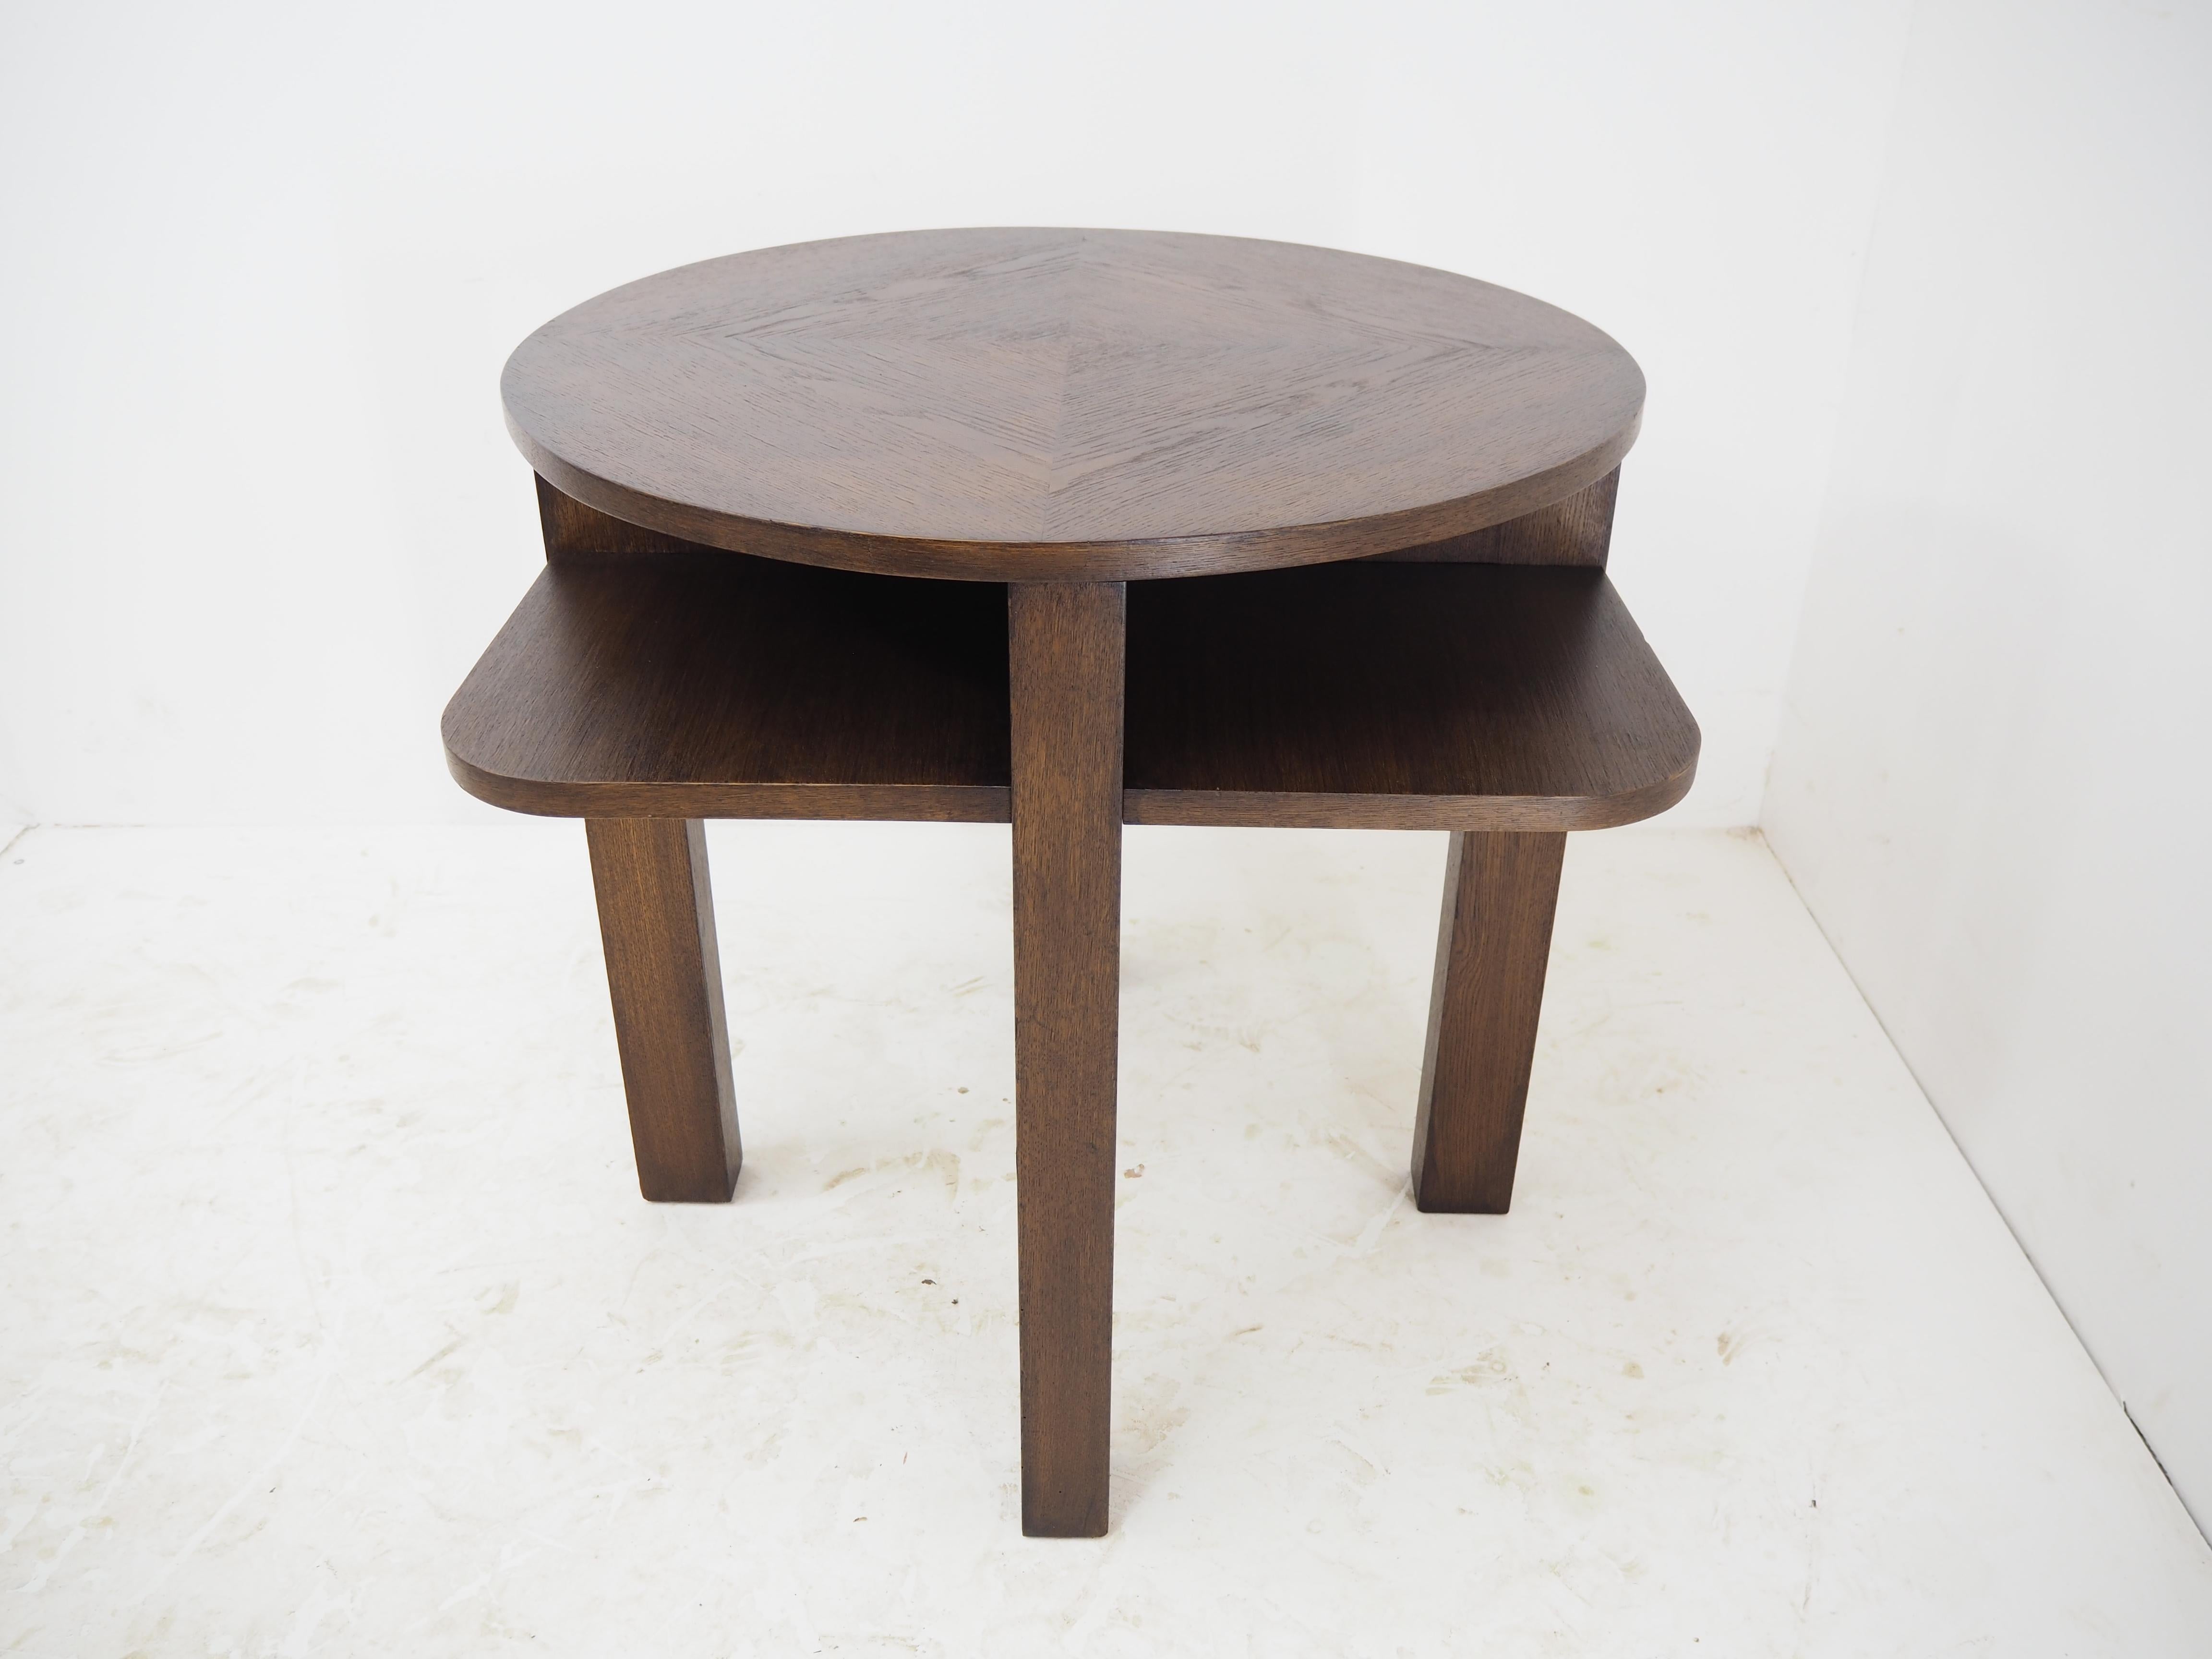 Made in Europe 
side table
in good original condition
sometimes scratches
hard construction.